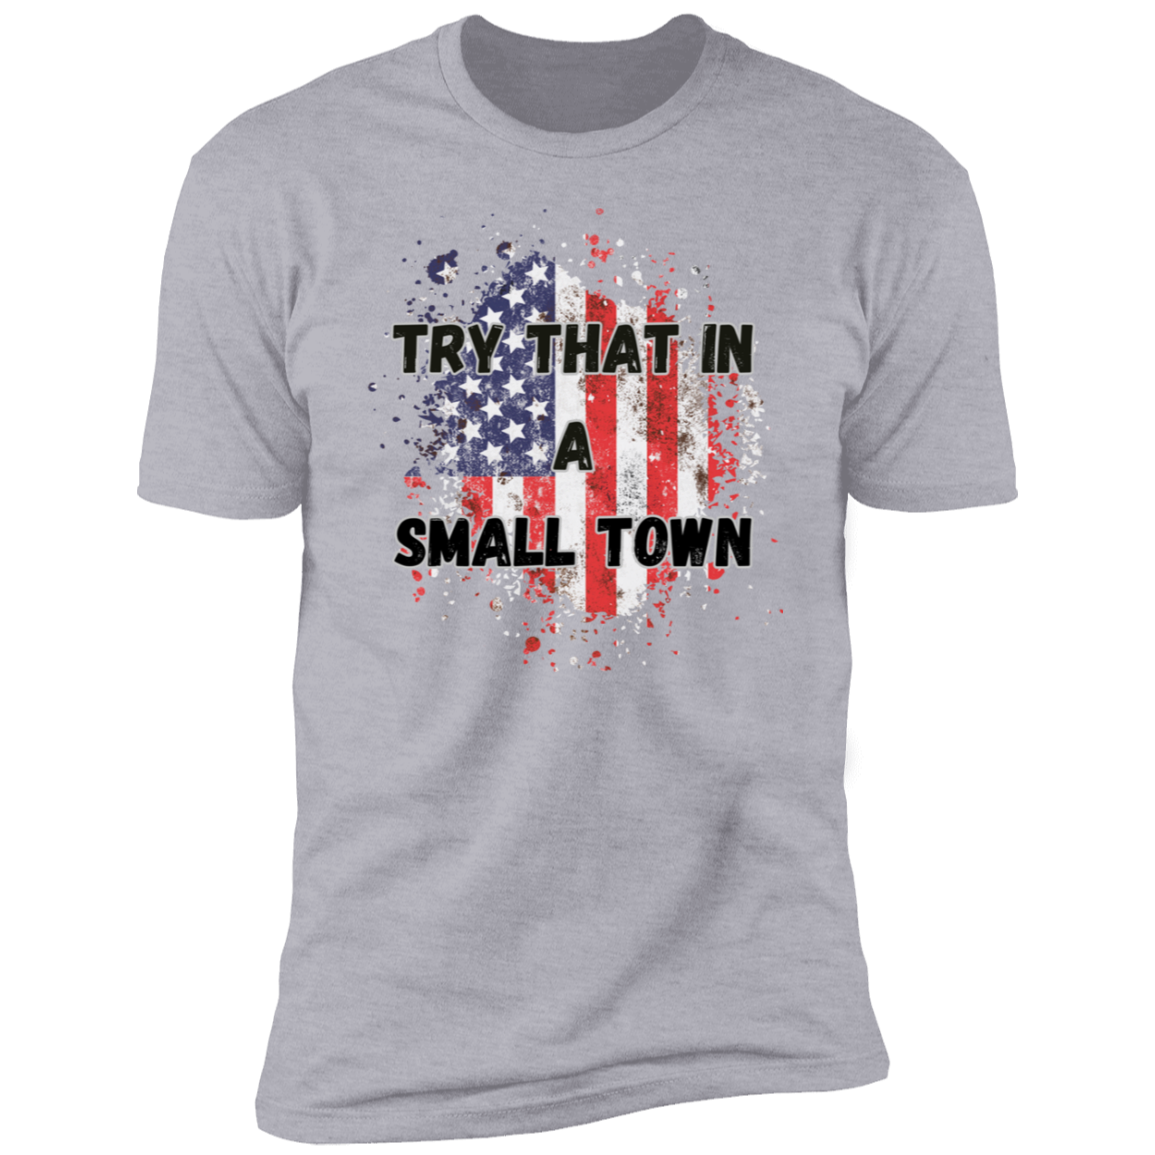 Try That in a Small Town Premium Short Sleeve T-Shirt